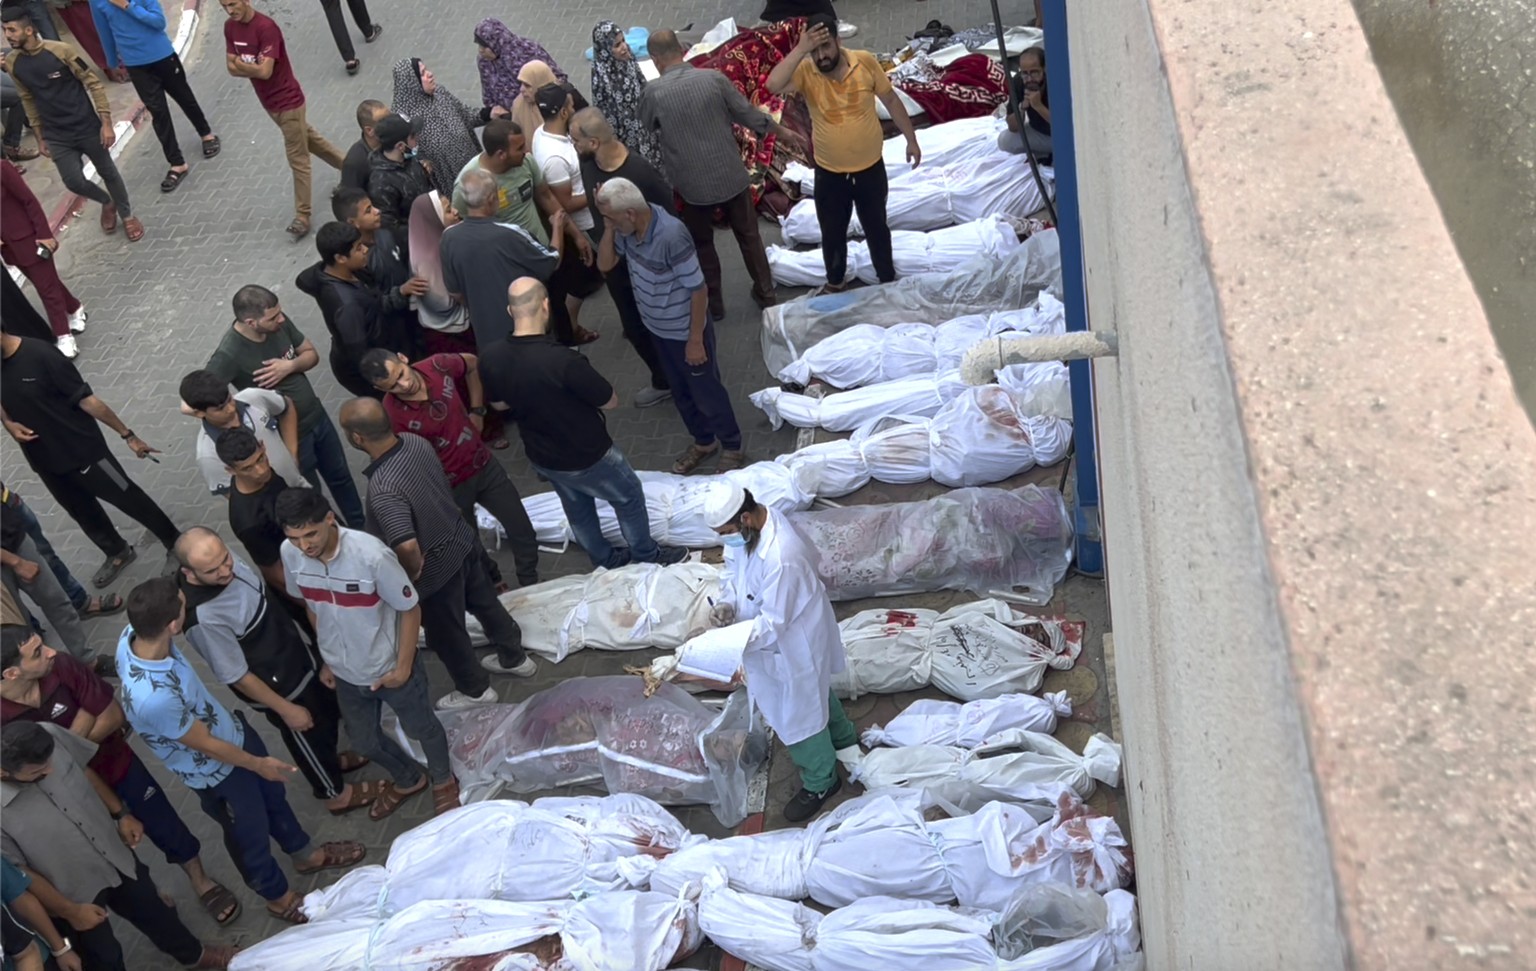 EDS NOTE: GRAPHIC CONTENT - In this frame grab from video, covered bodies lie outside an Indonesian hospital following Israeli airstrikes at the Jabaliya refugee camp on Gaza City?s outskirts, Tuesday ...